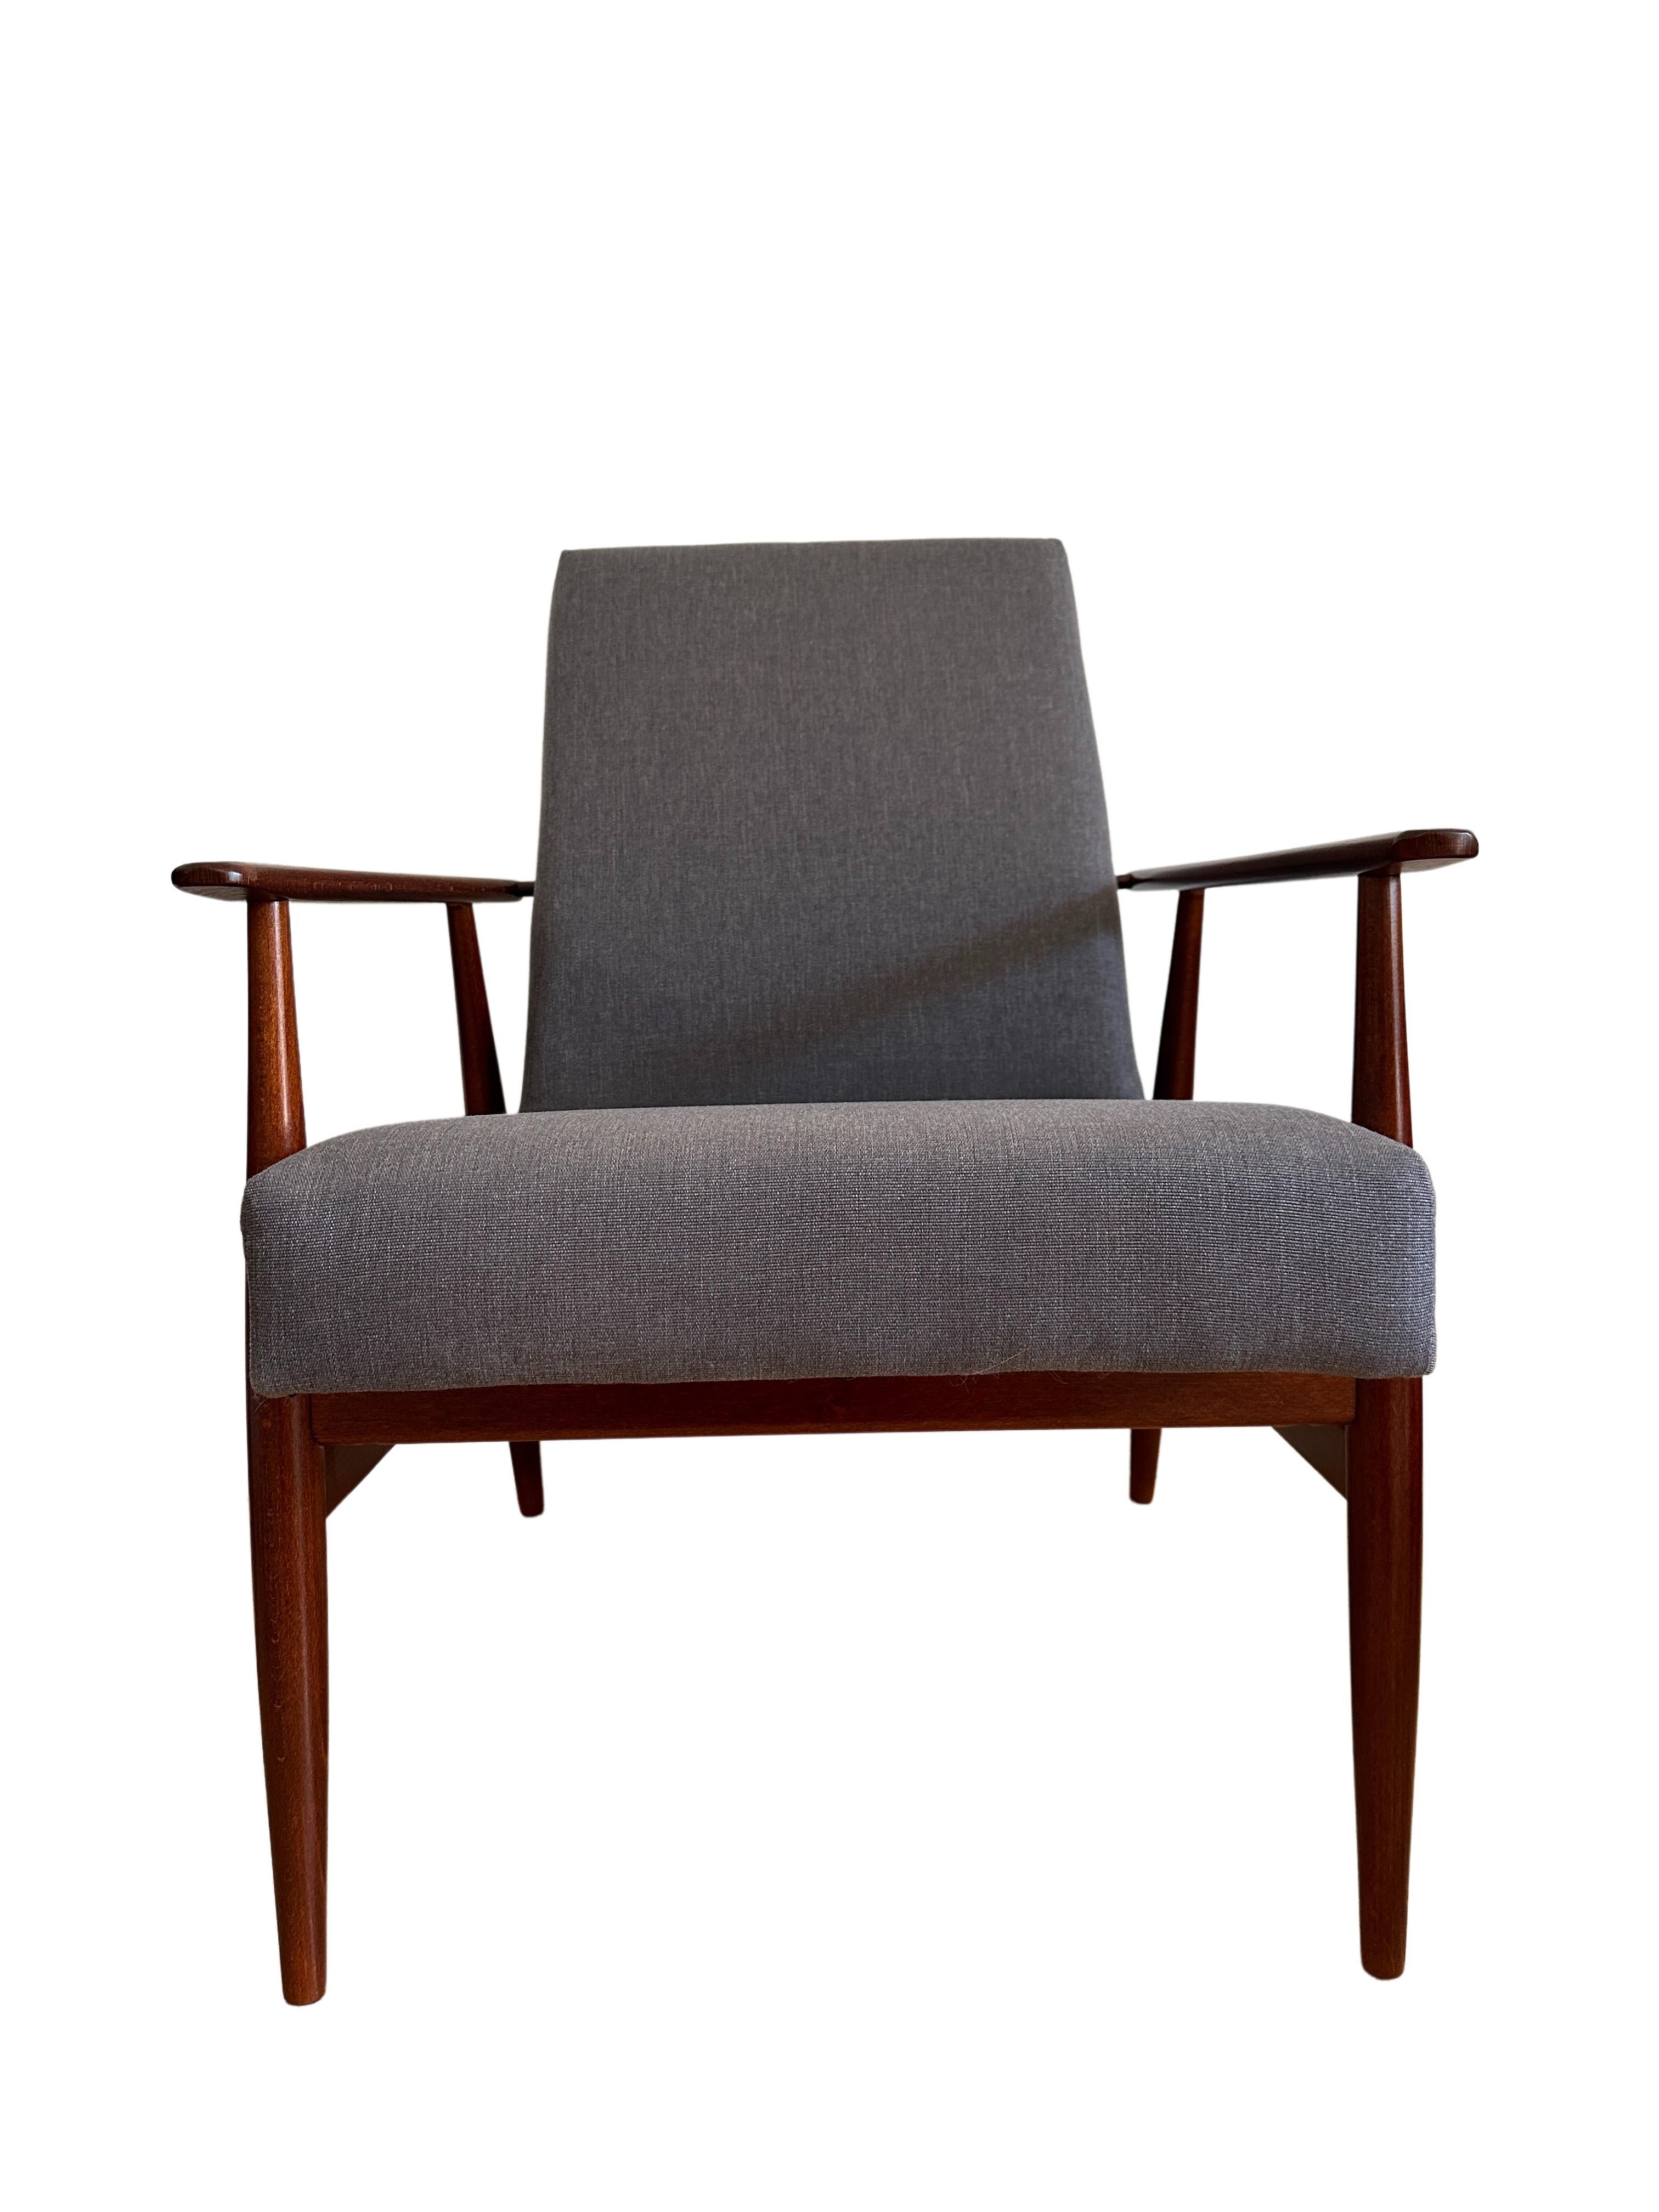 Hand-Crafted Set of Two Grey Armchairs in Kvadrat Upholstery by Henryk Lis, Europe, 1960s For Sale